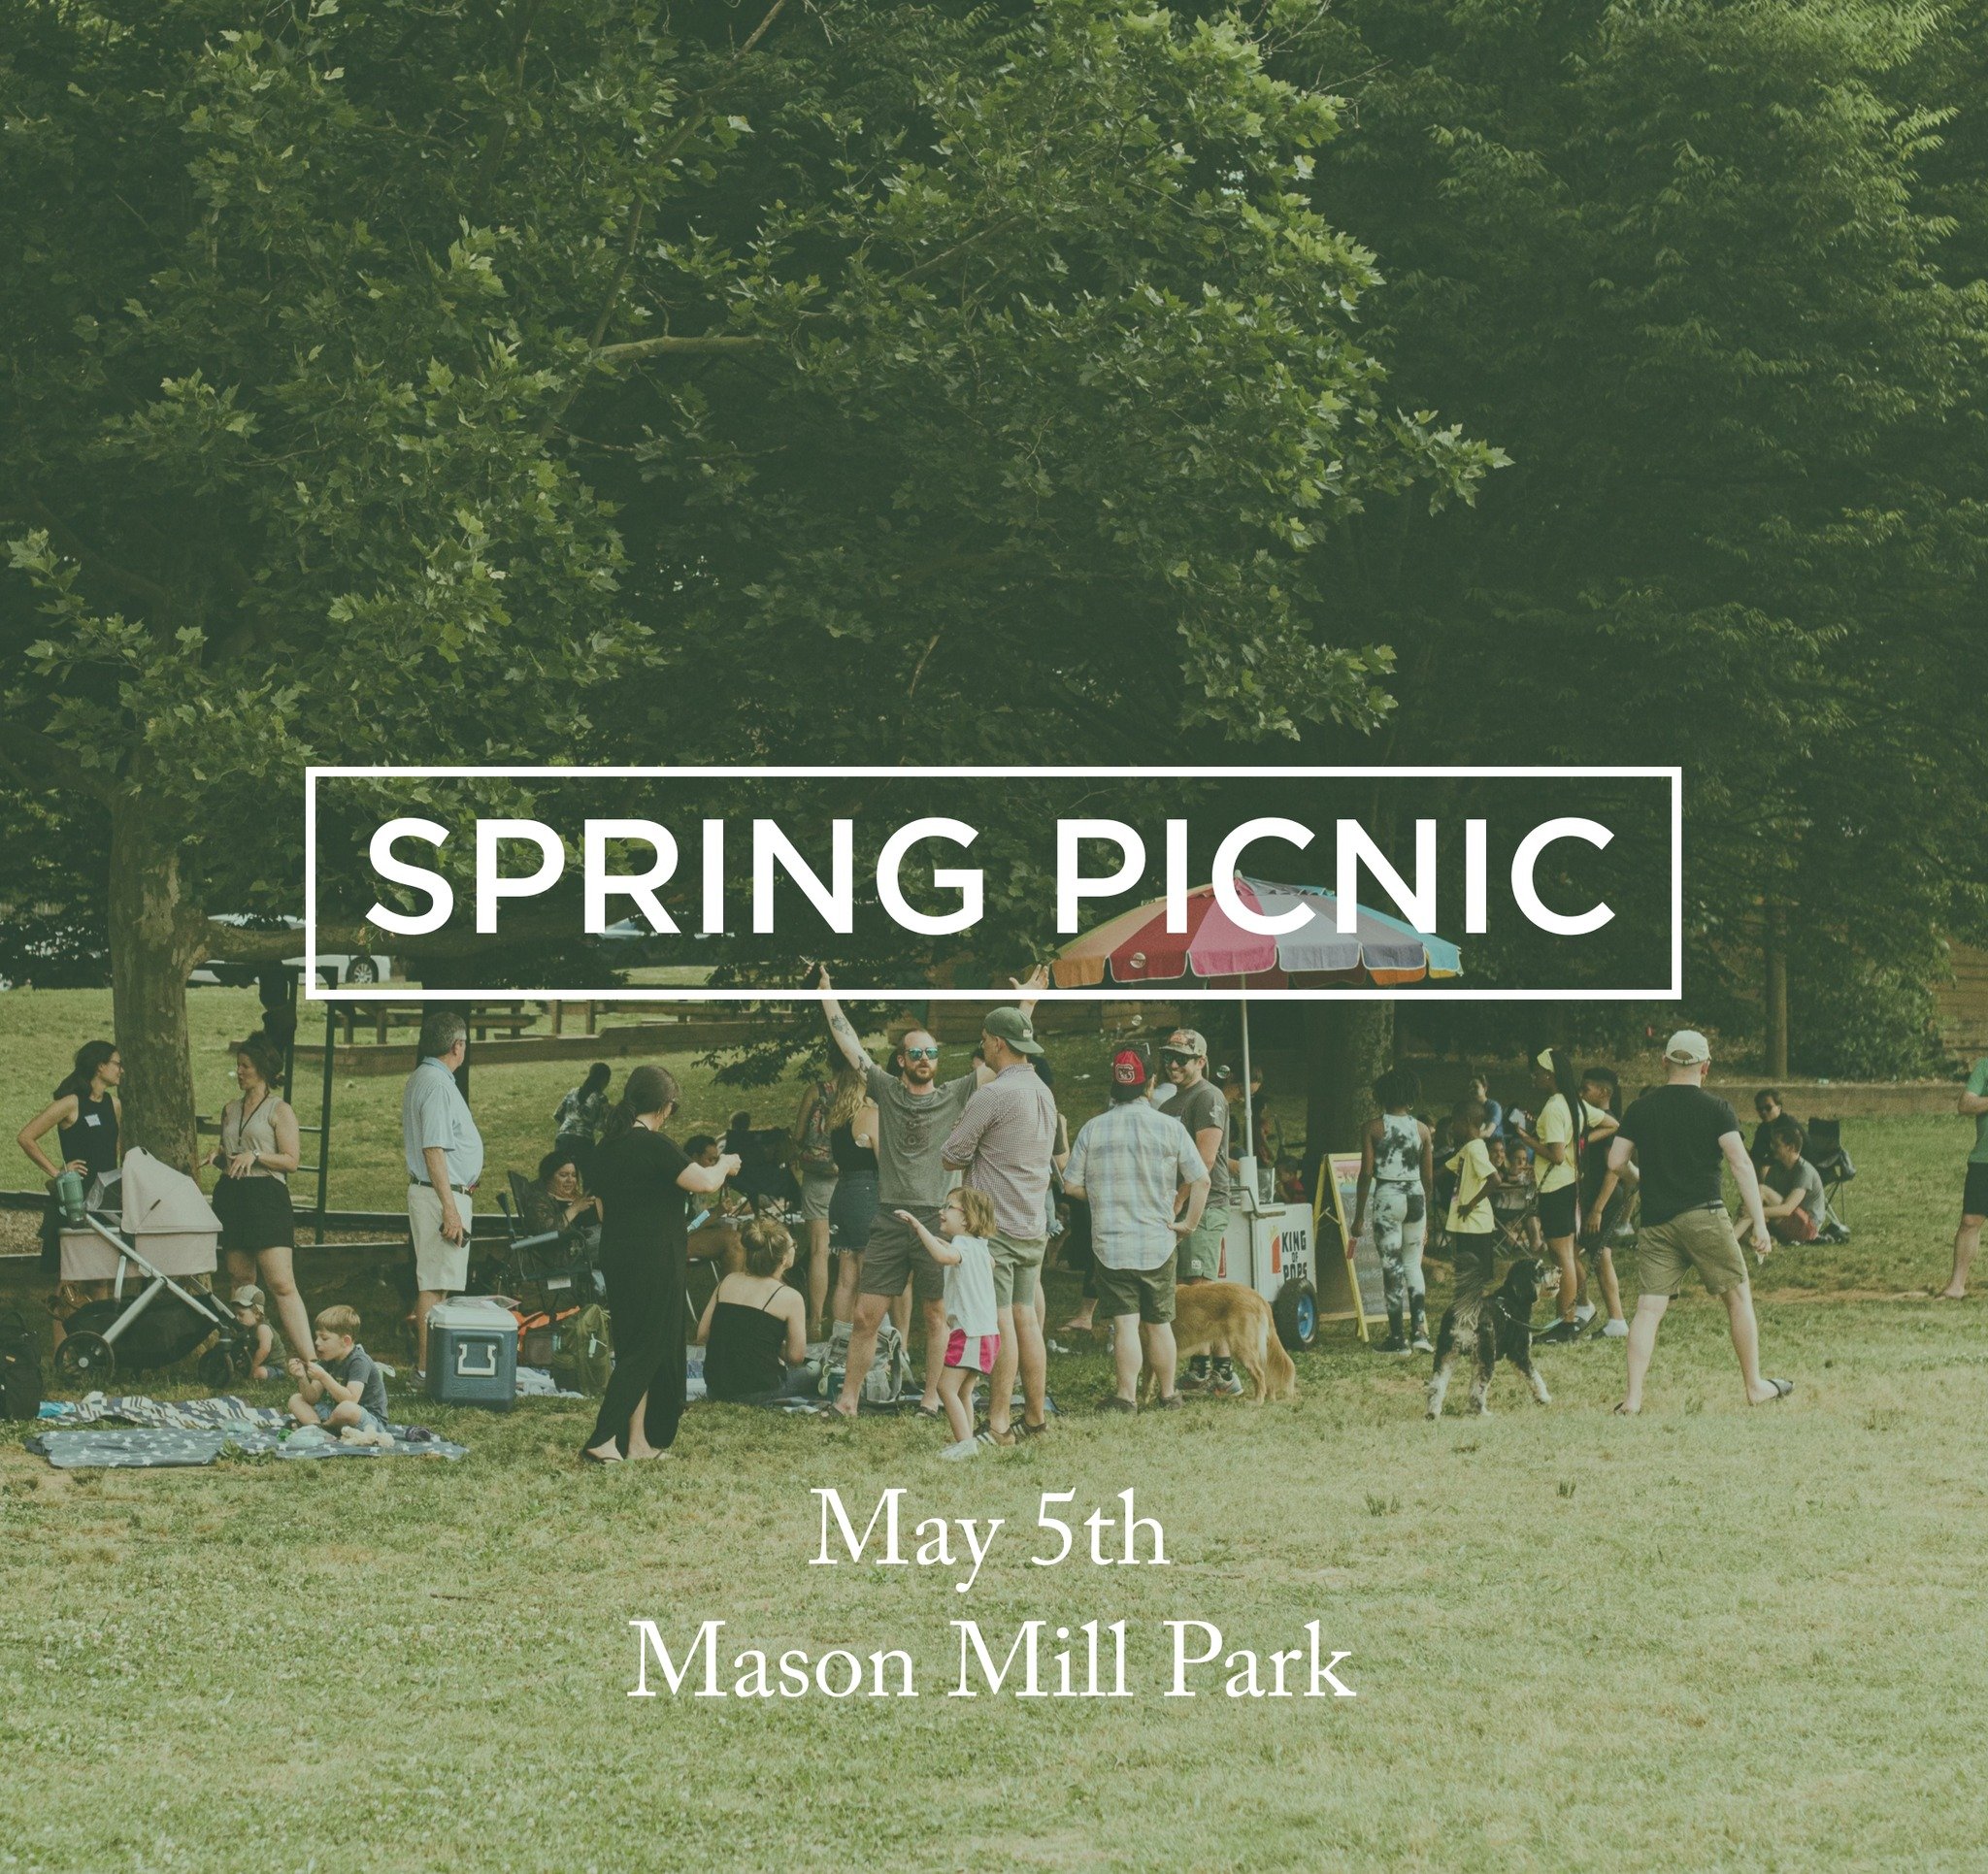 Join us May 5th for a spring picnic at Mason Mill Park! Bring your own snacks, picnic blanket and lawn games. This is a great opportunity to connect with others at Immanuel and meet new folks as well. All are welcome! Register at immanuelatl.org/even